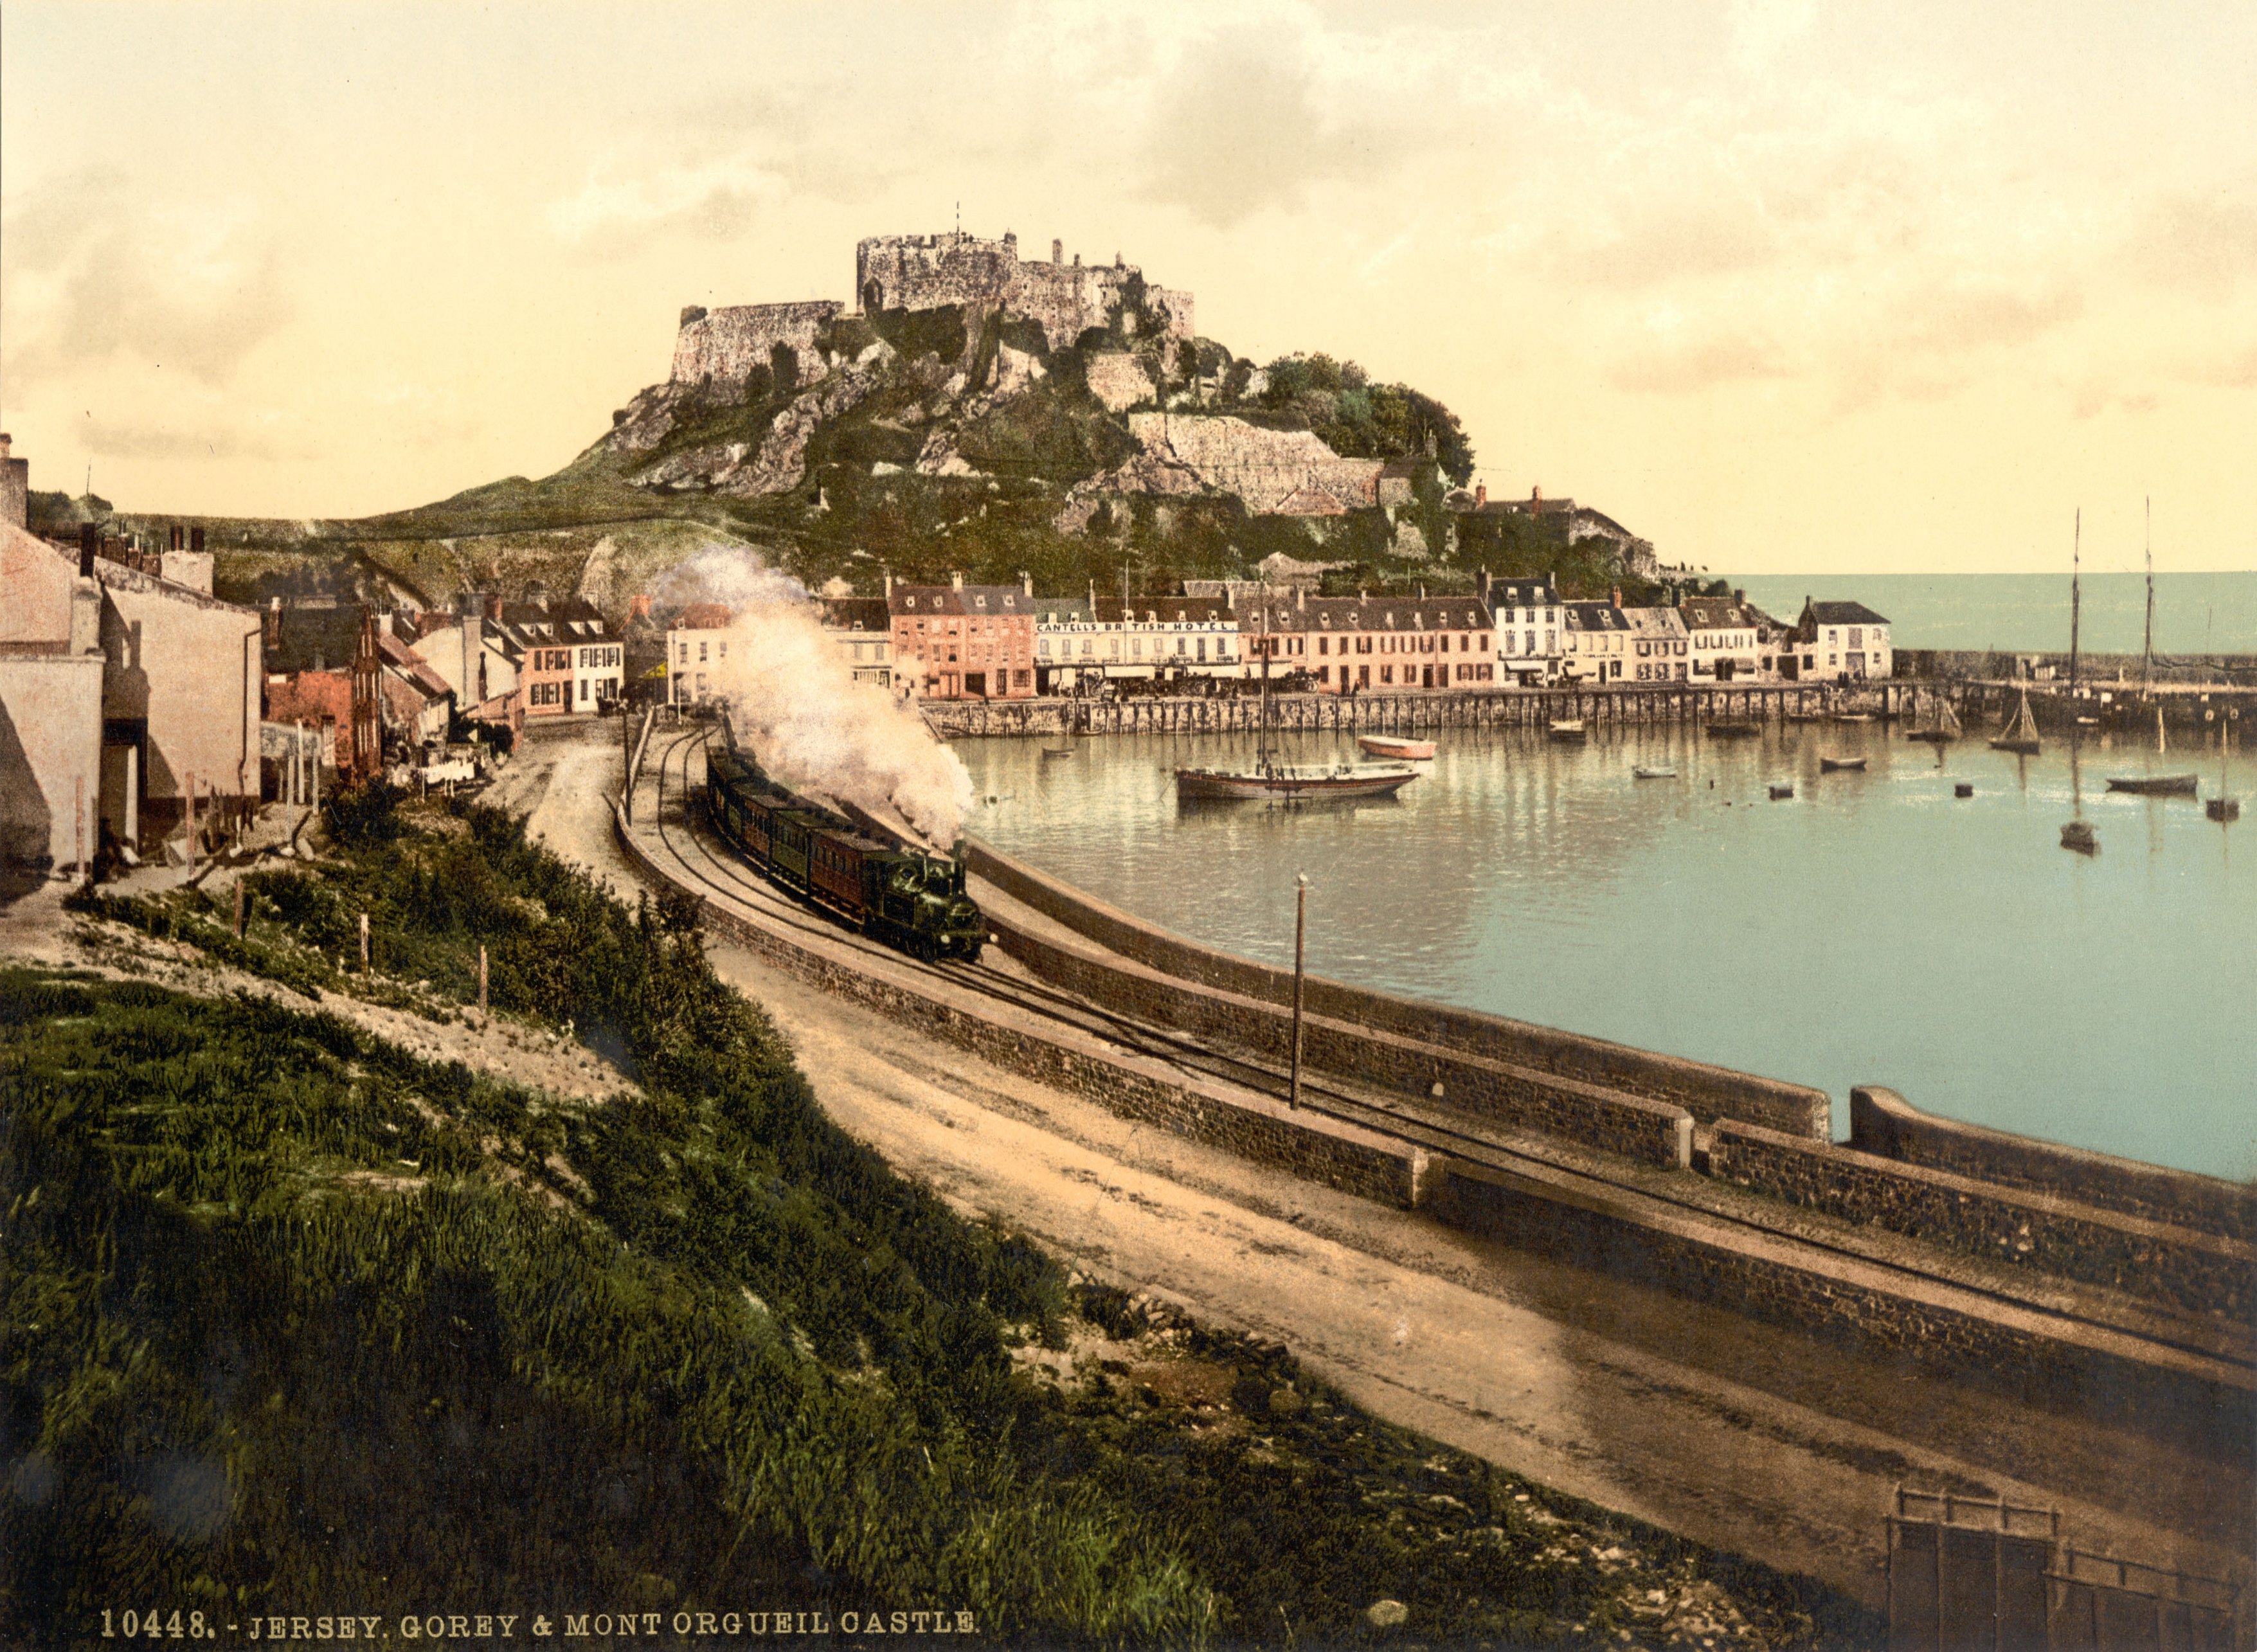 Photocrom print of a circa 1895 view of the Jersey Eastern Railway at Gorey.